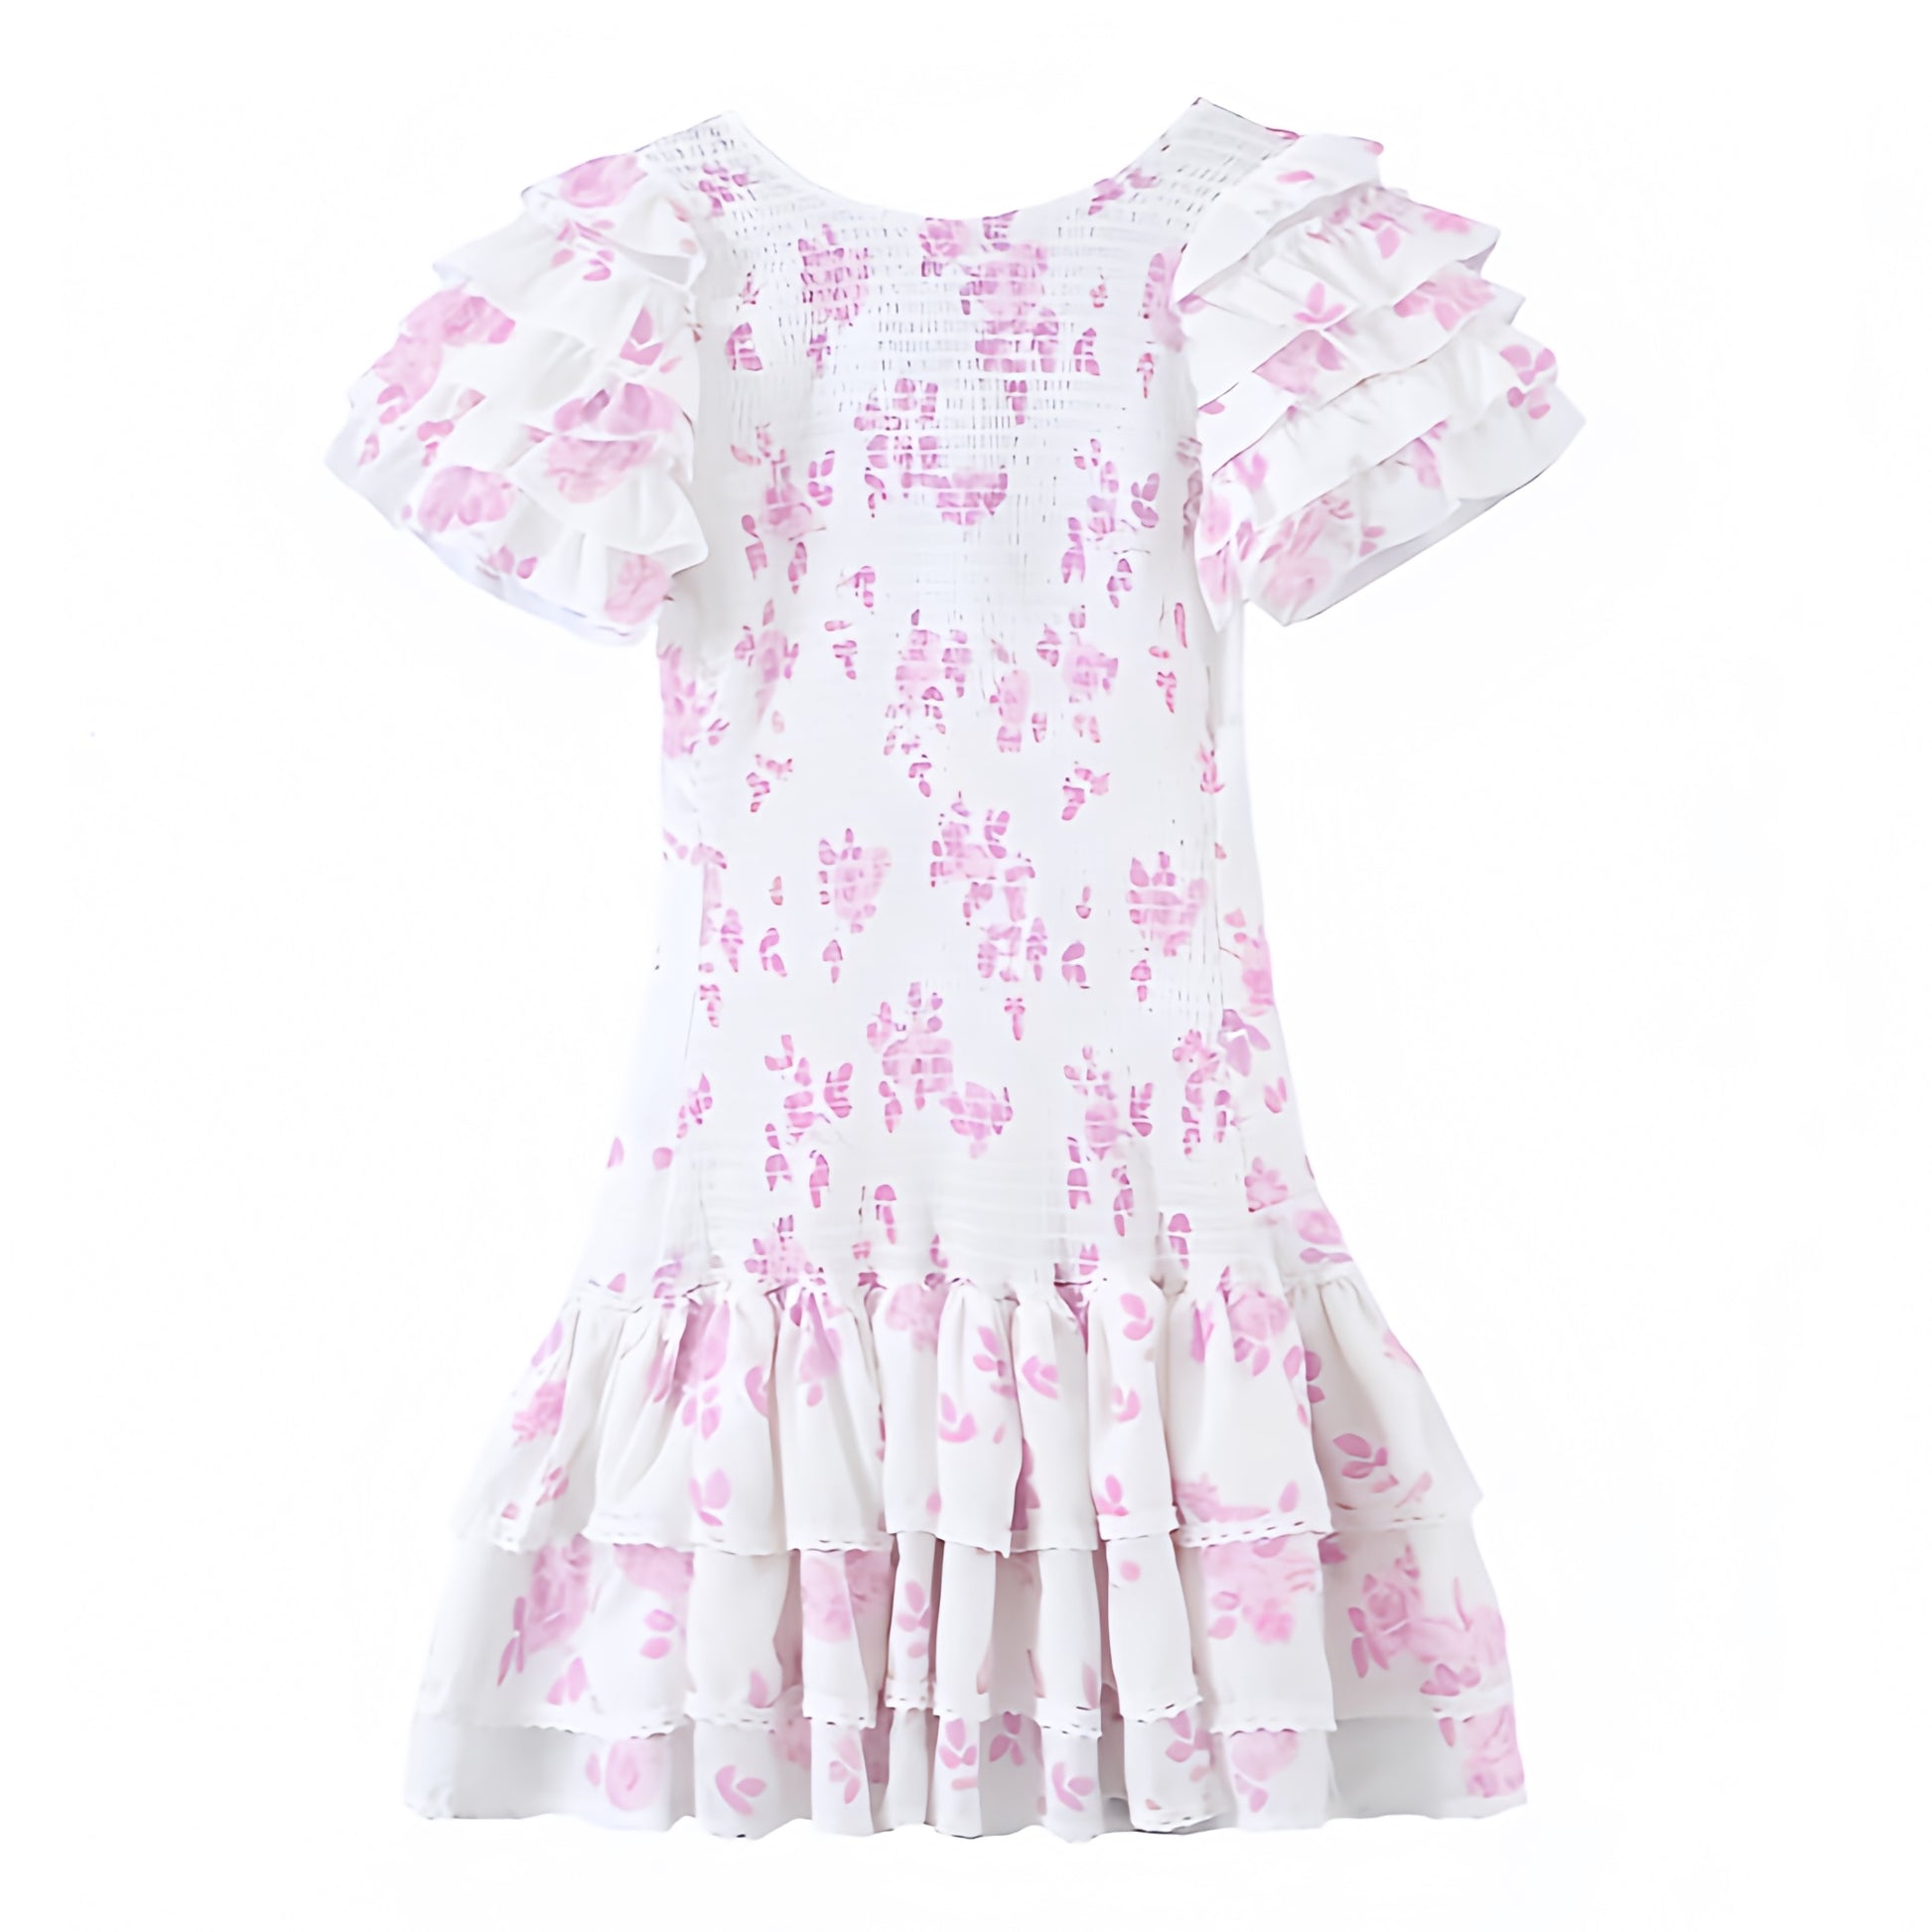 floral-print-light-pink-and-white-rose-flower-patterned-layered-ruffle-lace-trim-corset-bodycon-button-down-v-neck-short-puff-sleeve-drop-waist-mini-dress-women-ladies-chic-trendy-spring-2024-summer-elegant-semi-formal-classy-feminine-preppy-style-prom-party-debutante-coquette-sundress-loveshackfancy-altard-state-hello-molly-revolve-hill-house-dupe